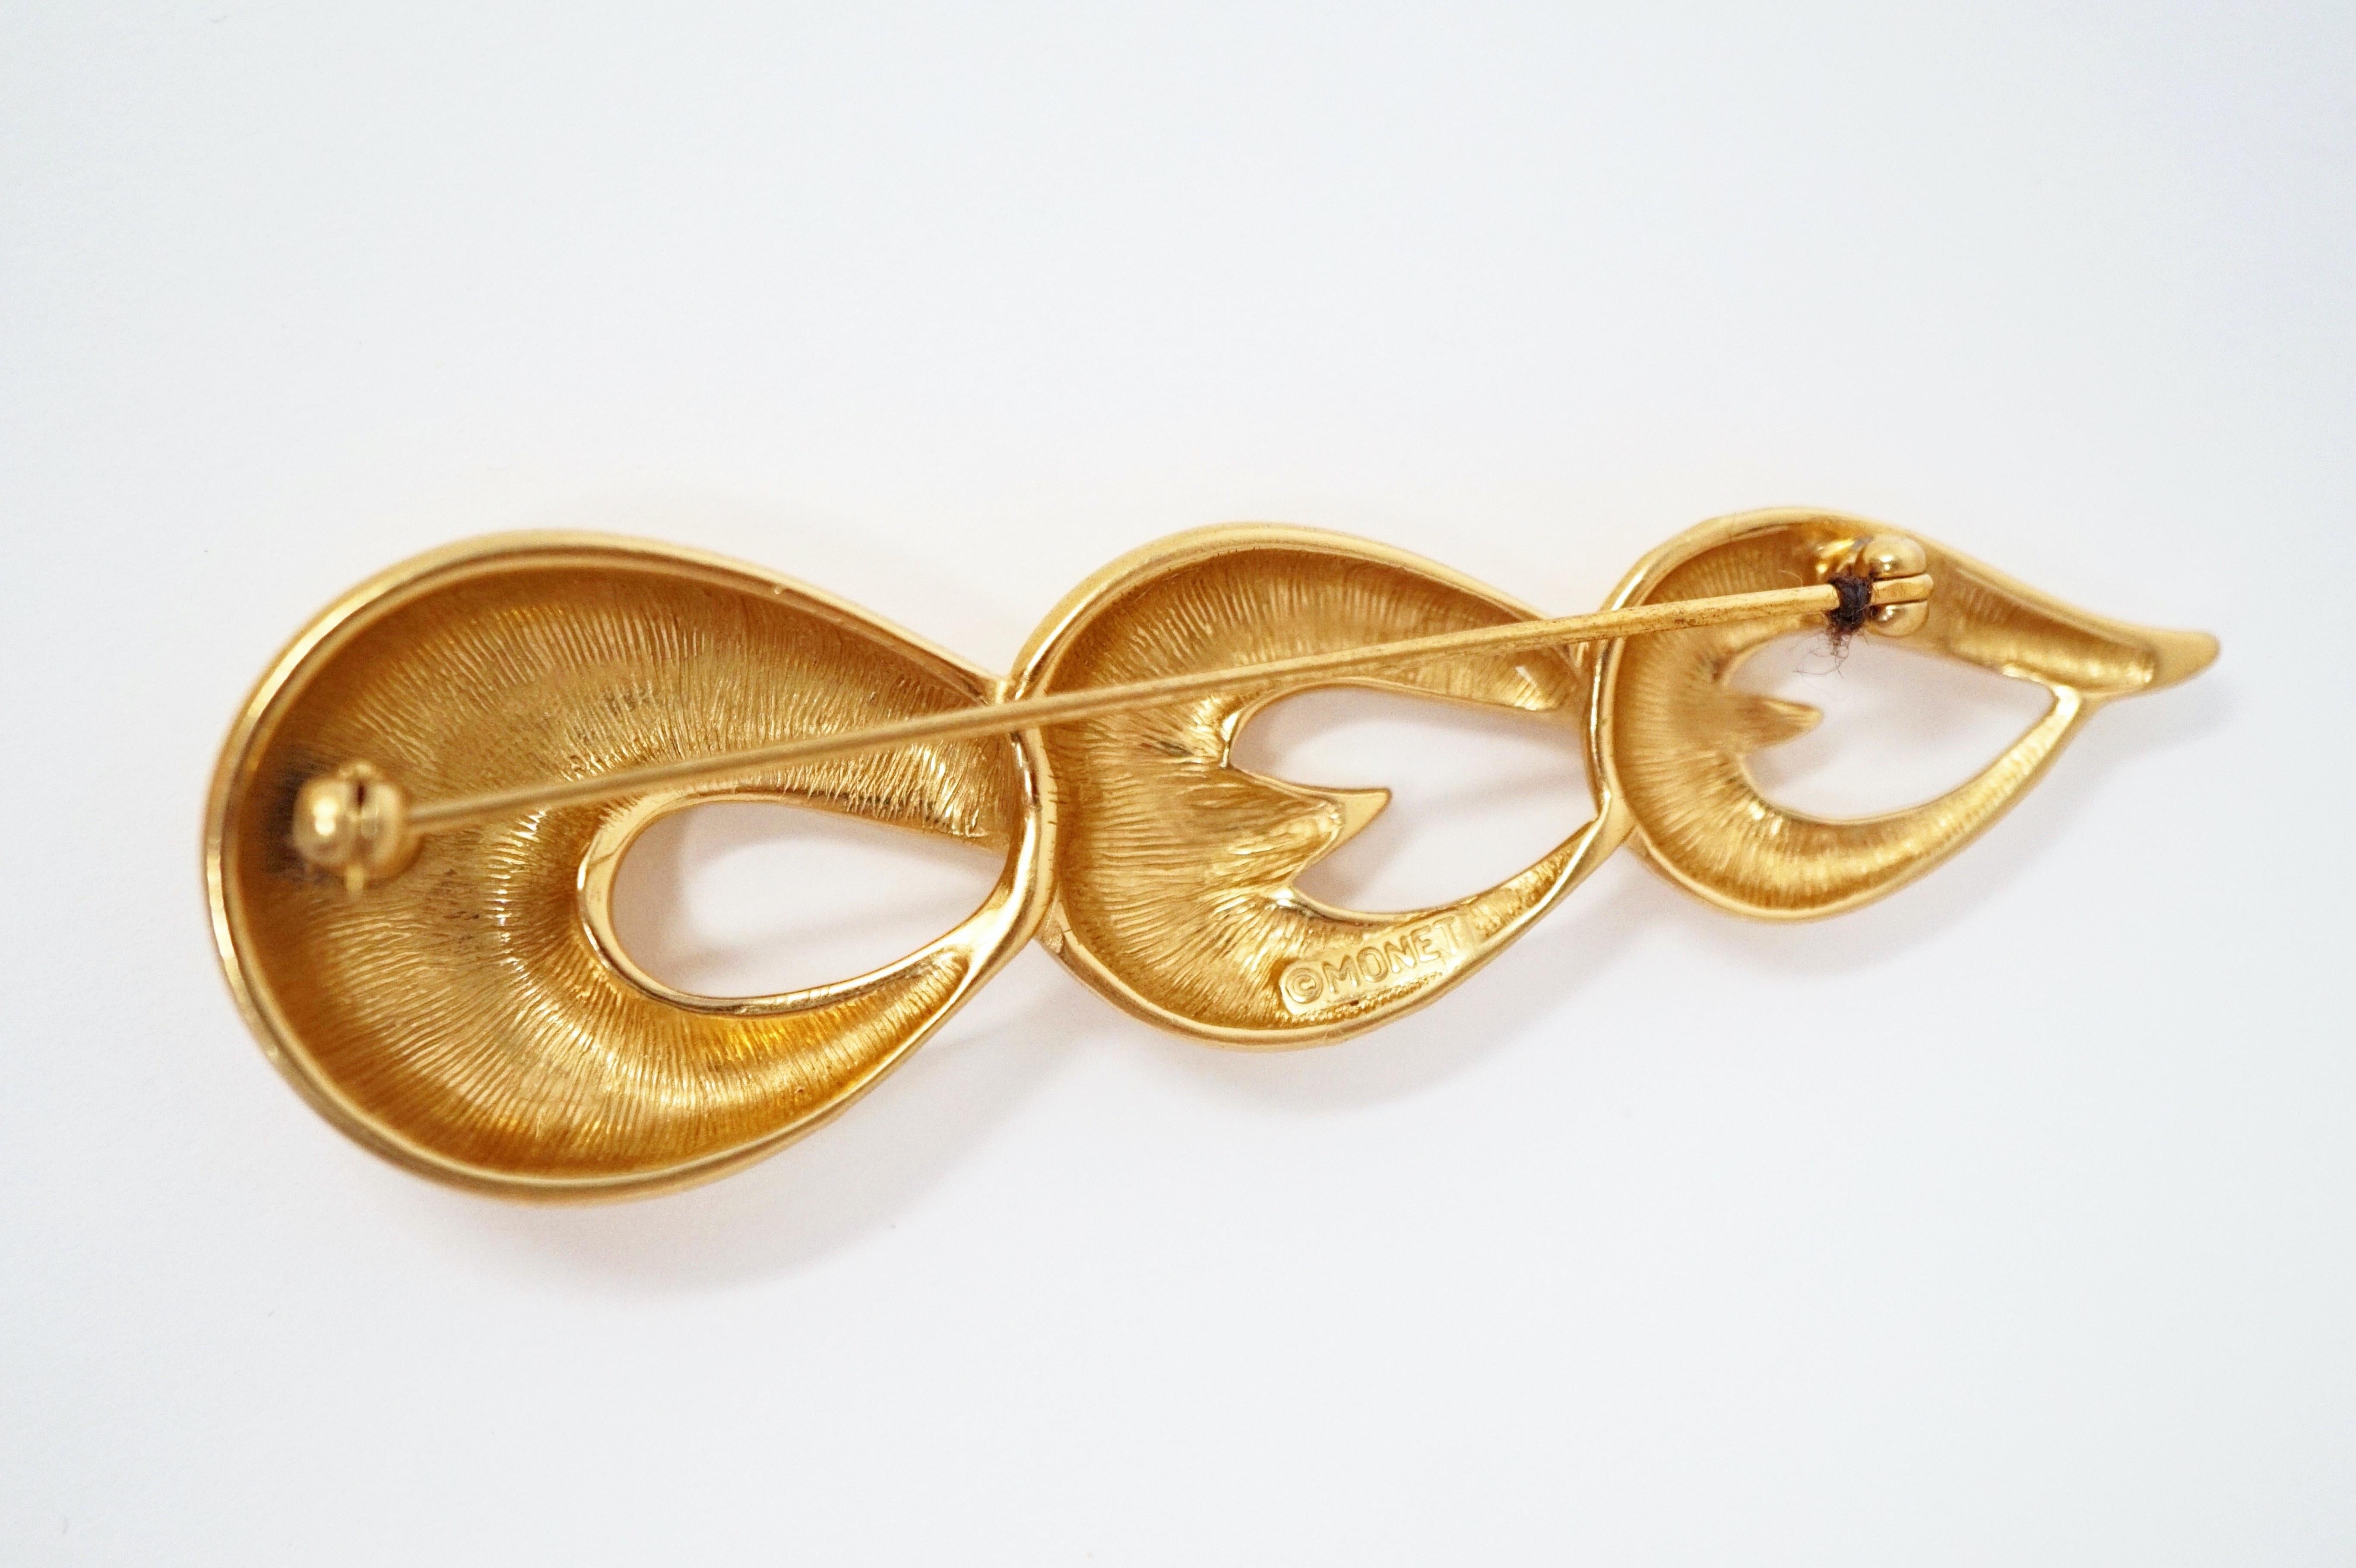 Vintage Satin Gold Abstract Brooch by Monet, circa 1970s For Sale 3